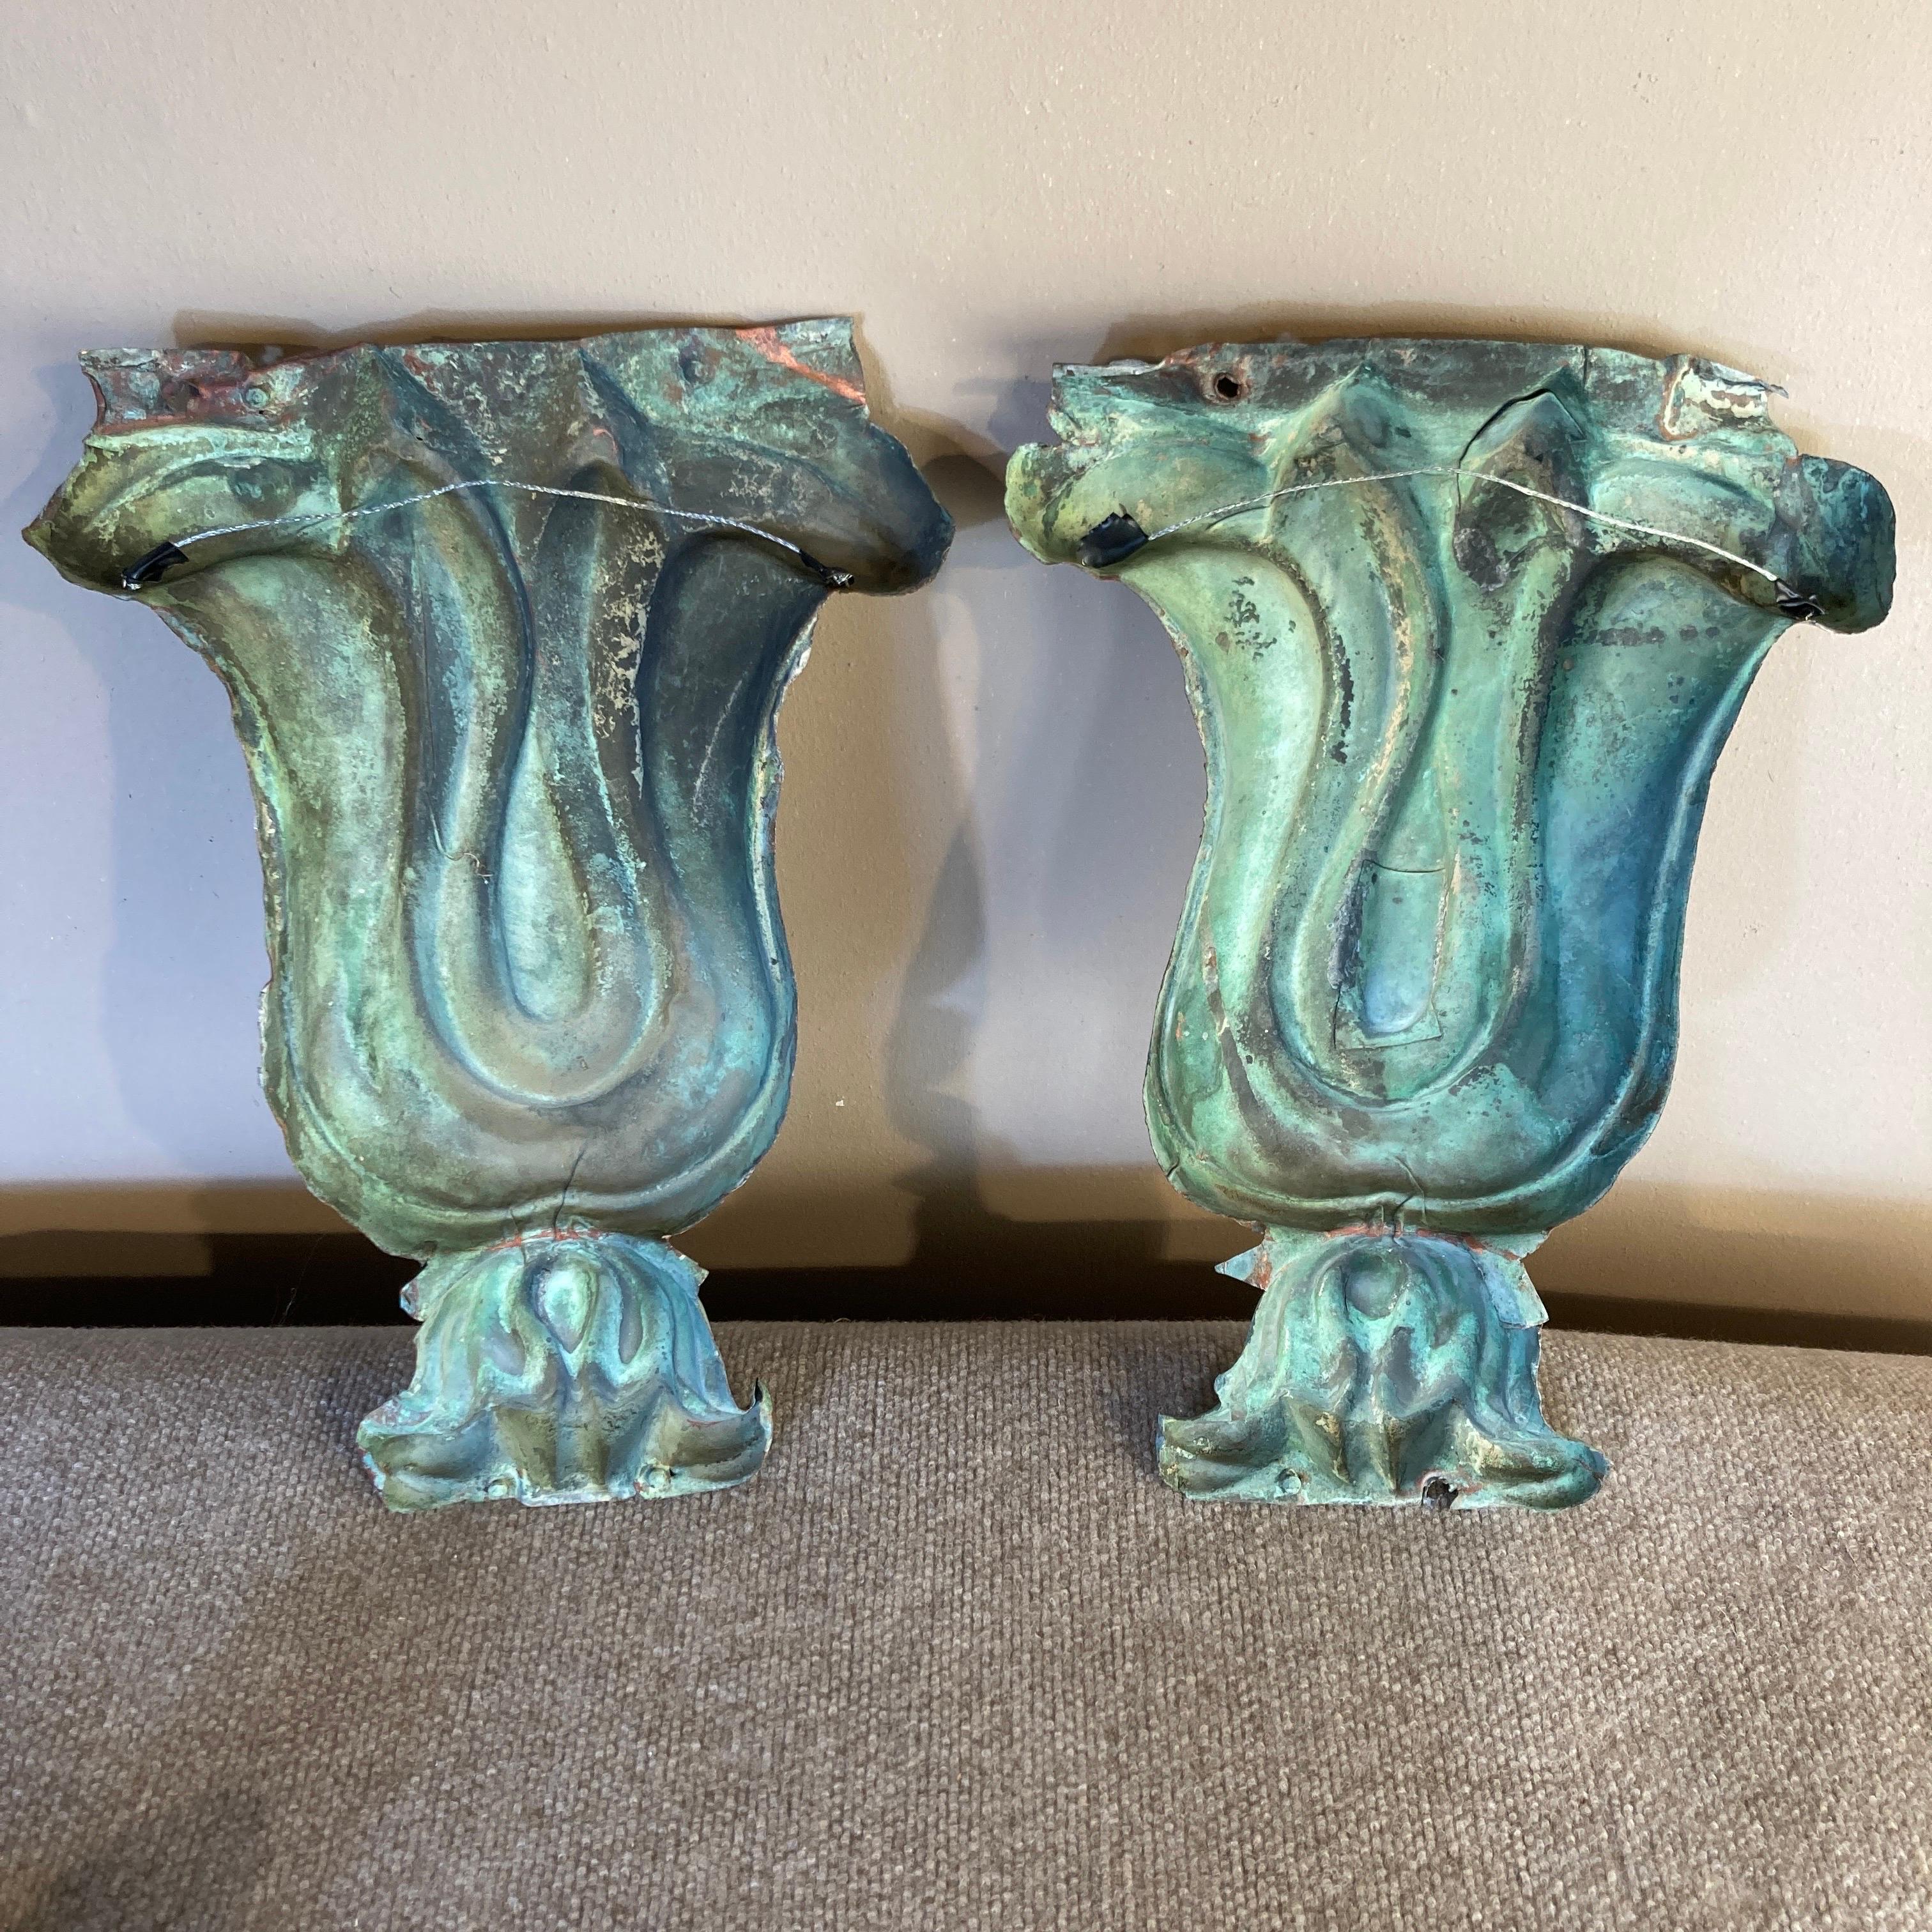 Pair of circa 1880 American molded copper architectural building ornaments in the best original verdigris surface. Now wired for hanging. Supper original surface.